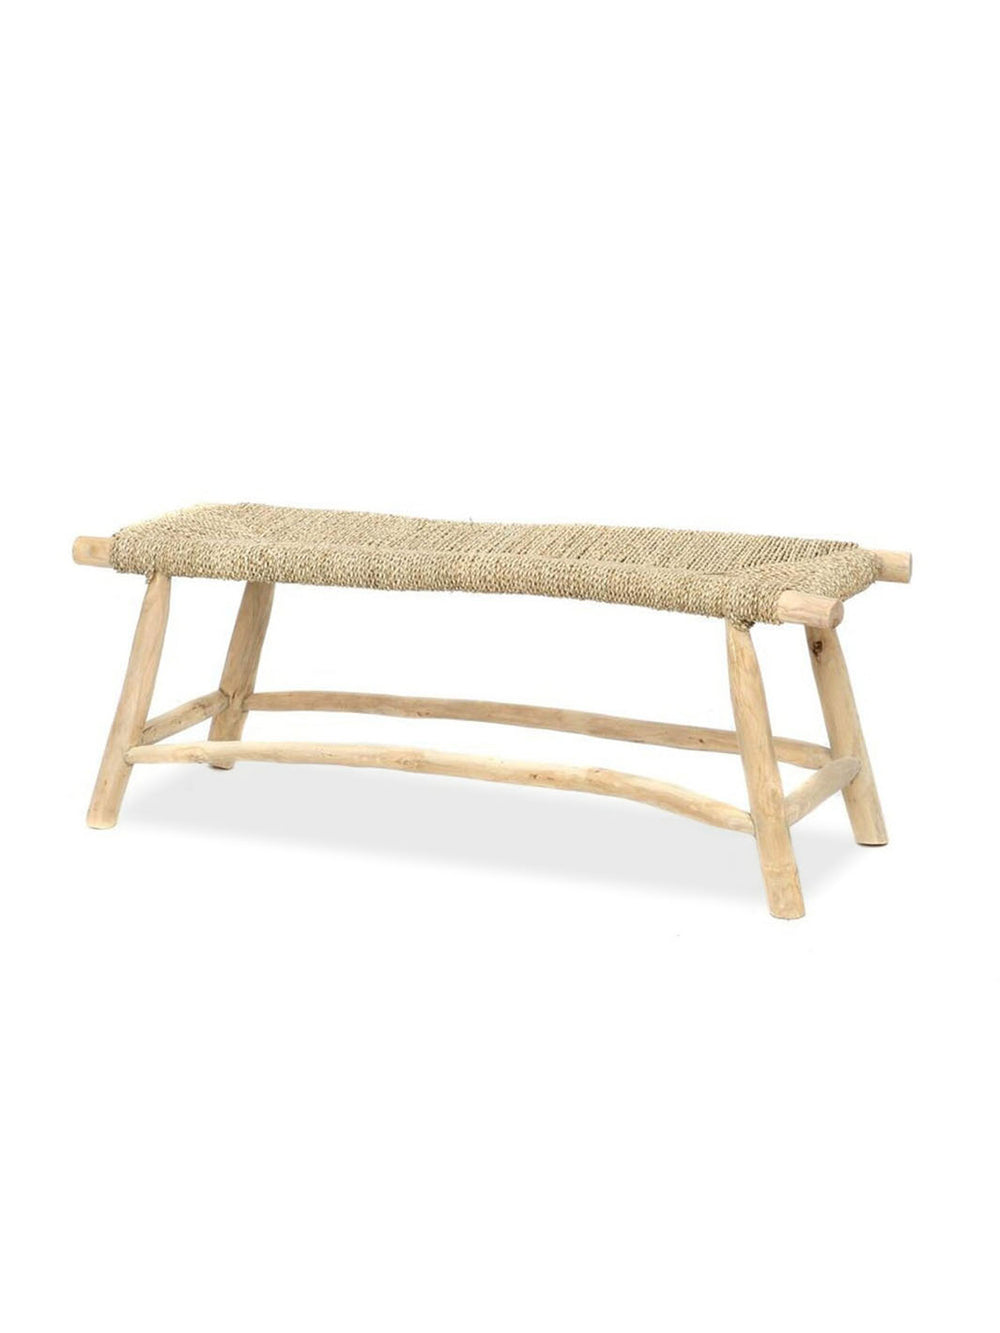 Handcrafted Natural Solid Wood Bench Libitii Benches LIB-0045-1